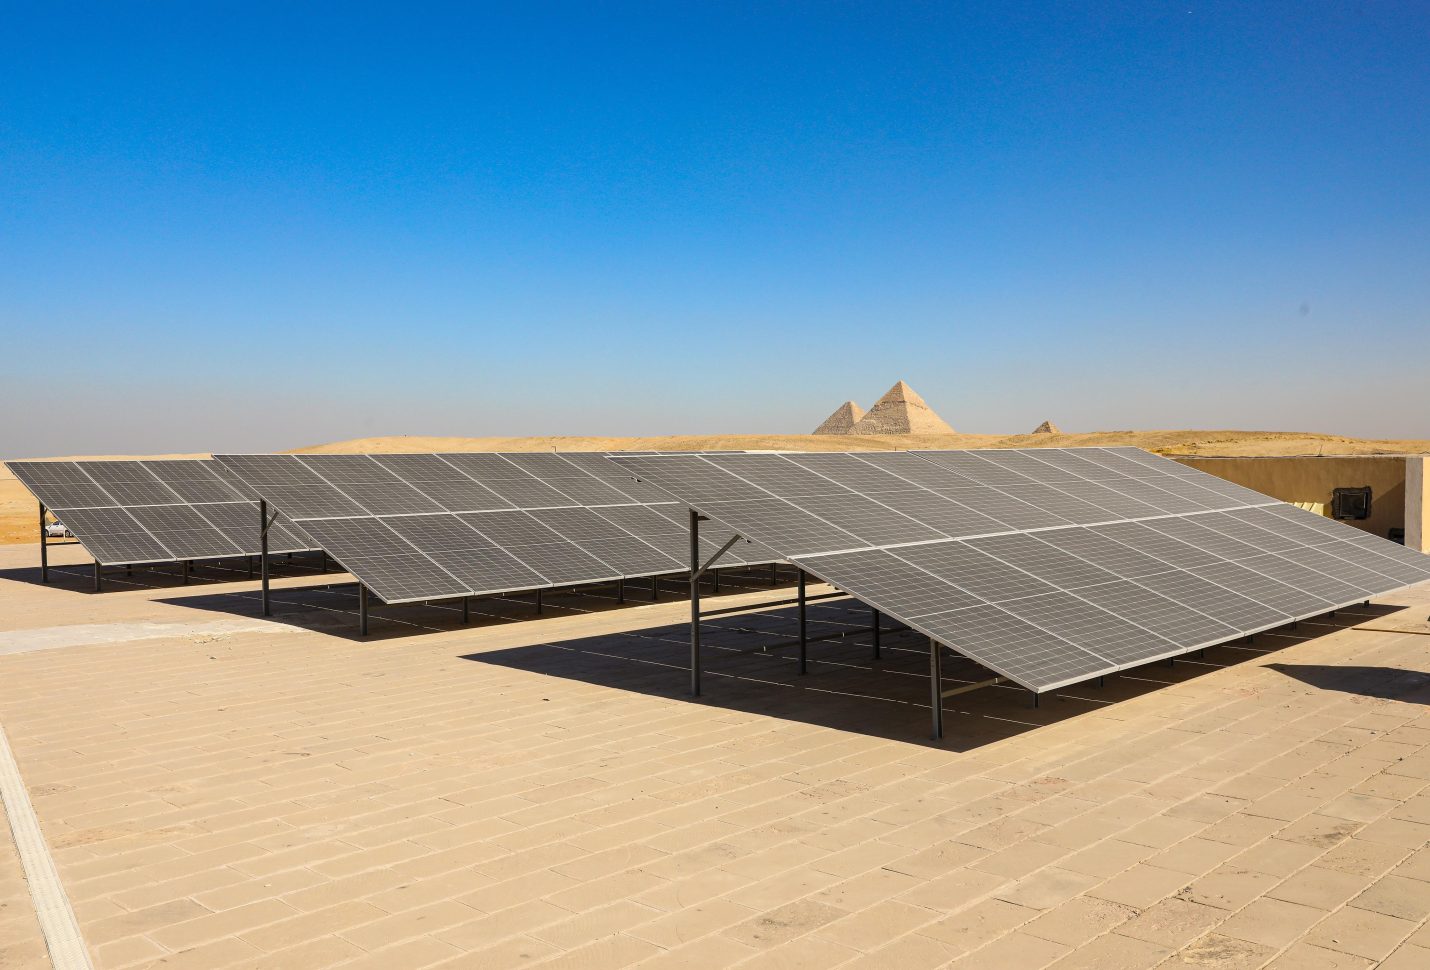 Egypt, UNDP inaugurate solar power stations at 5 world heritage sites, museums